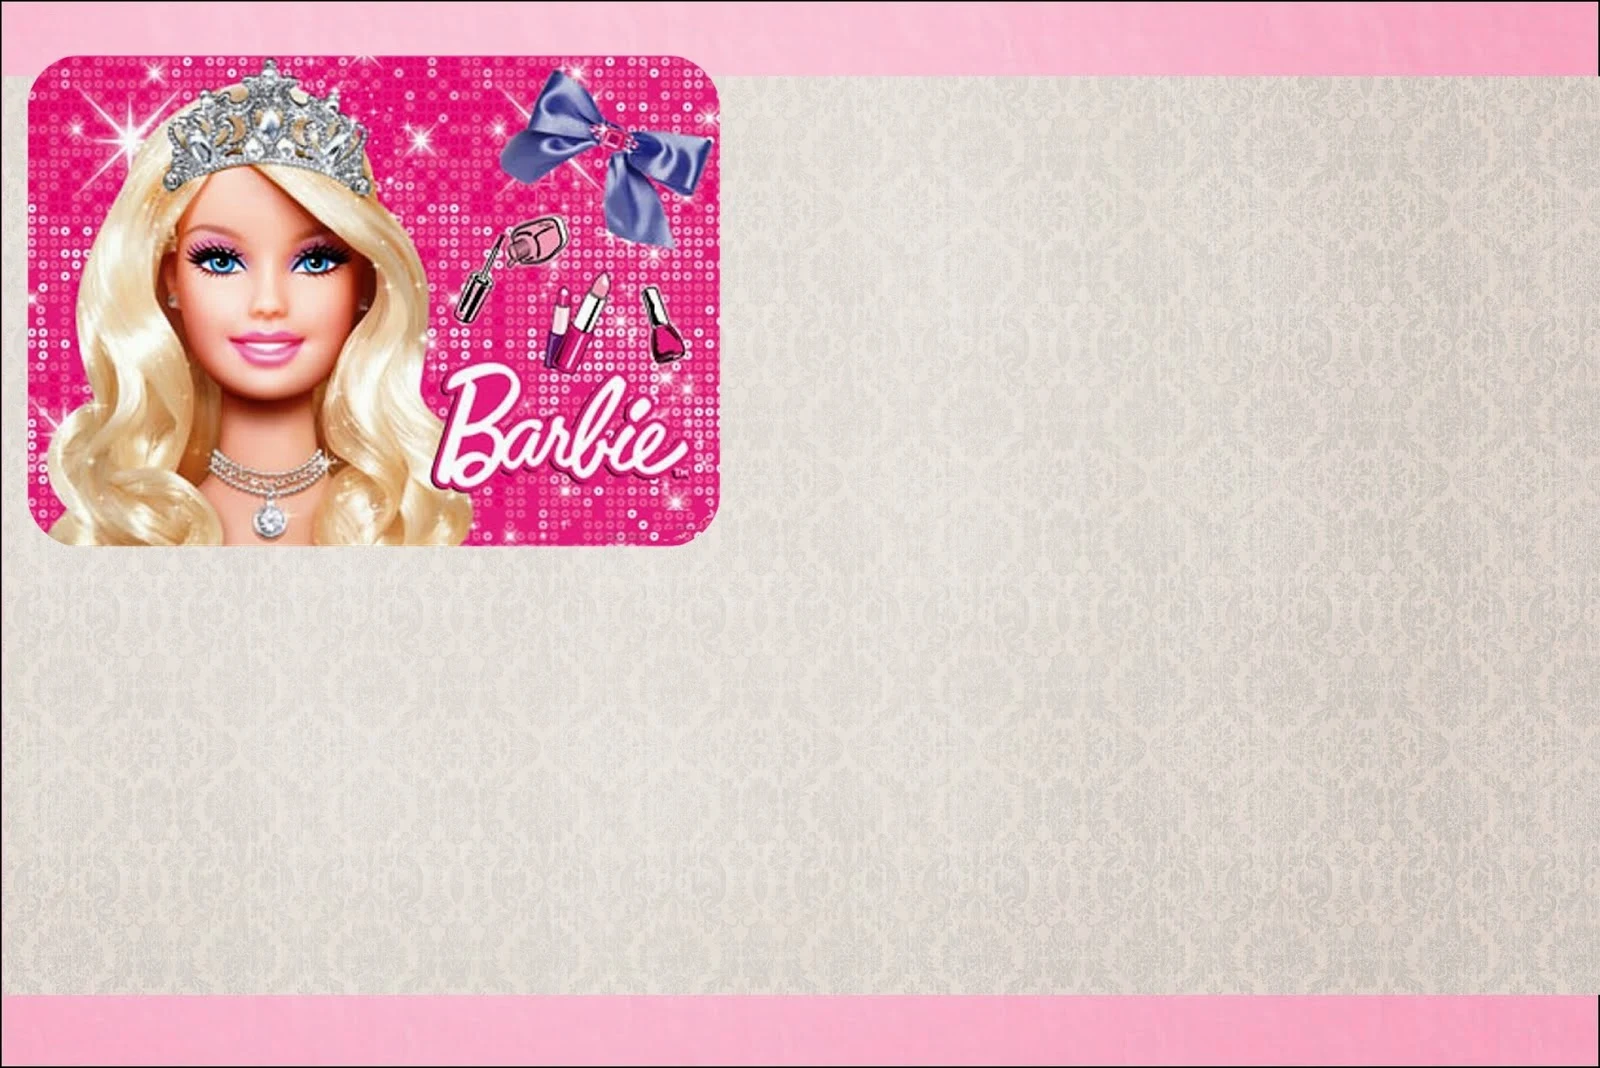 Barbie Life Style Free Printable Invitations, Labels or Cards.